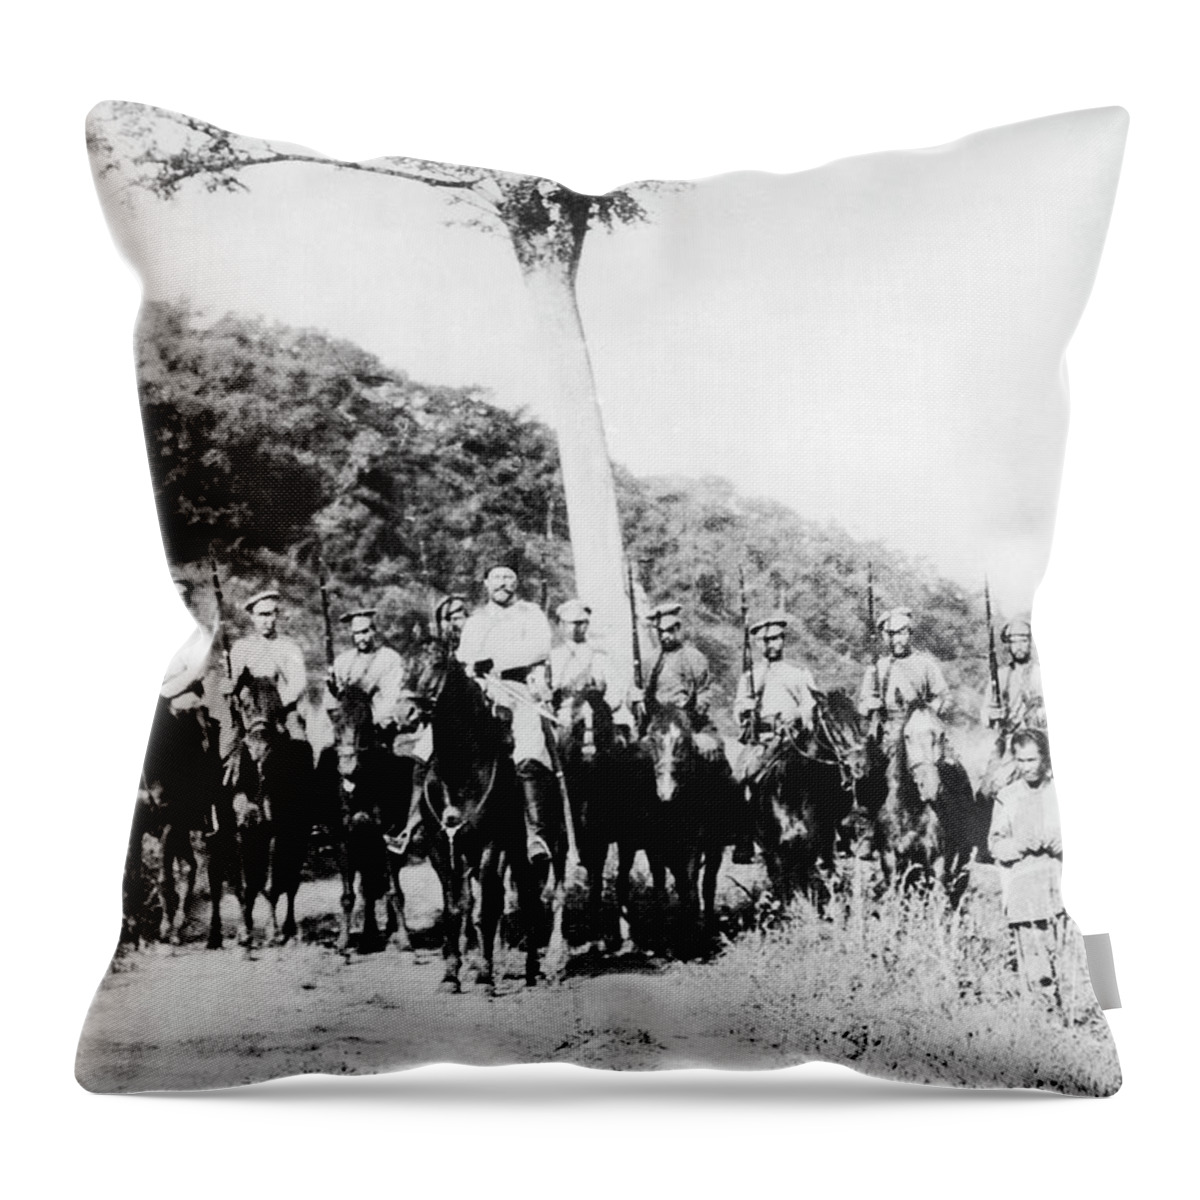 1910s Throw Pillow featuring the photograph Cossack Cavalry Troops by Underwood Archives